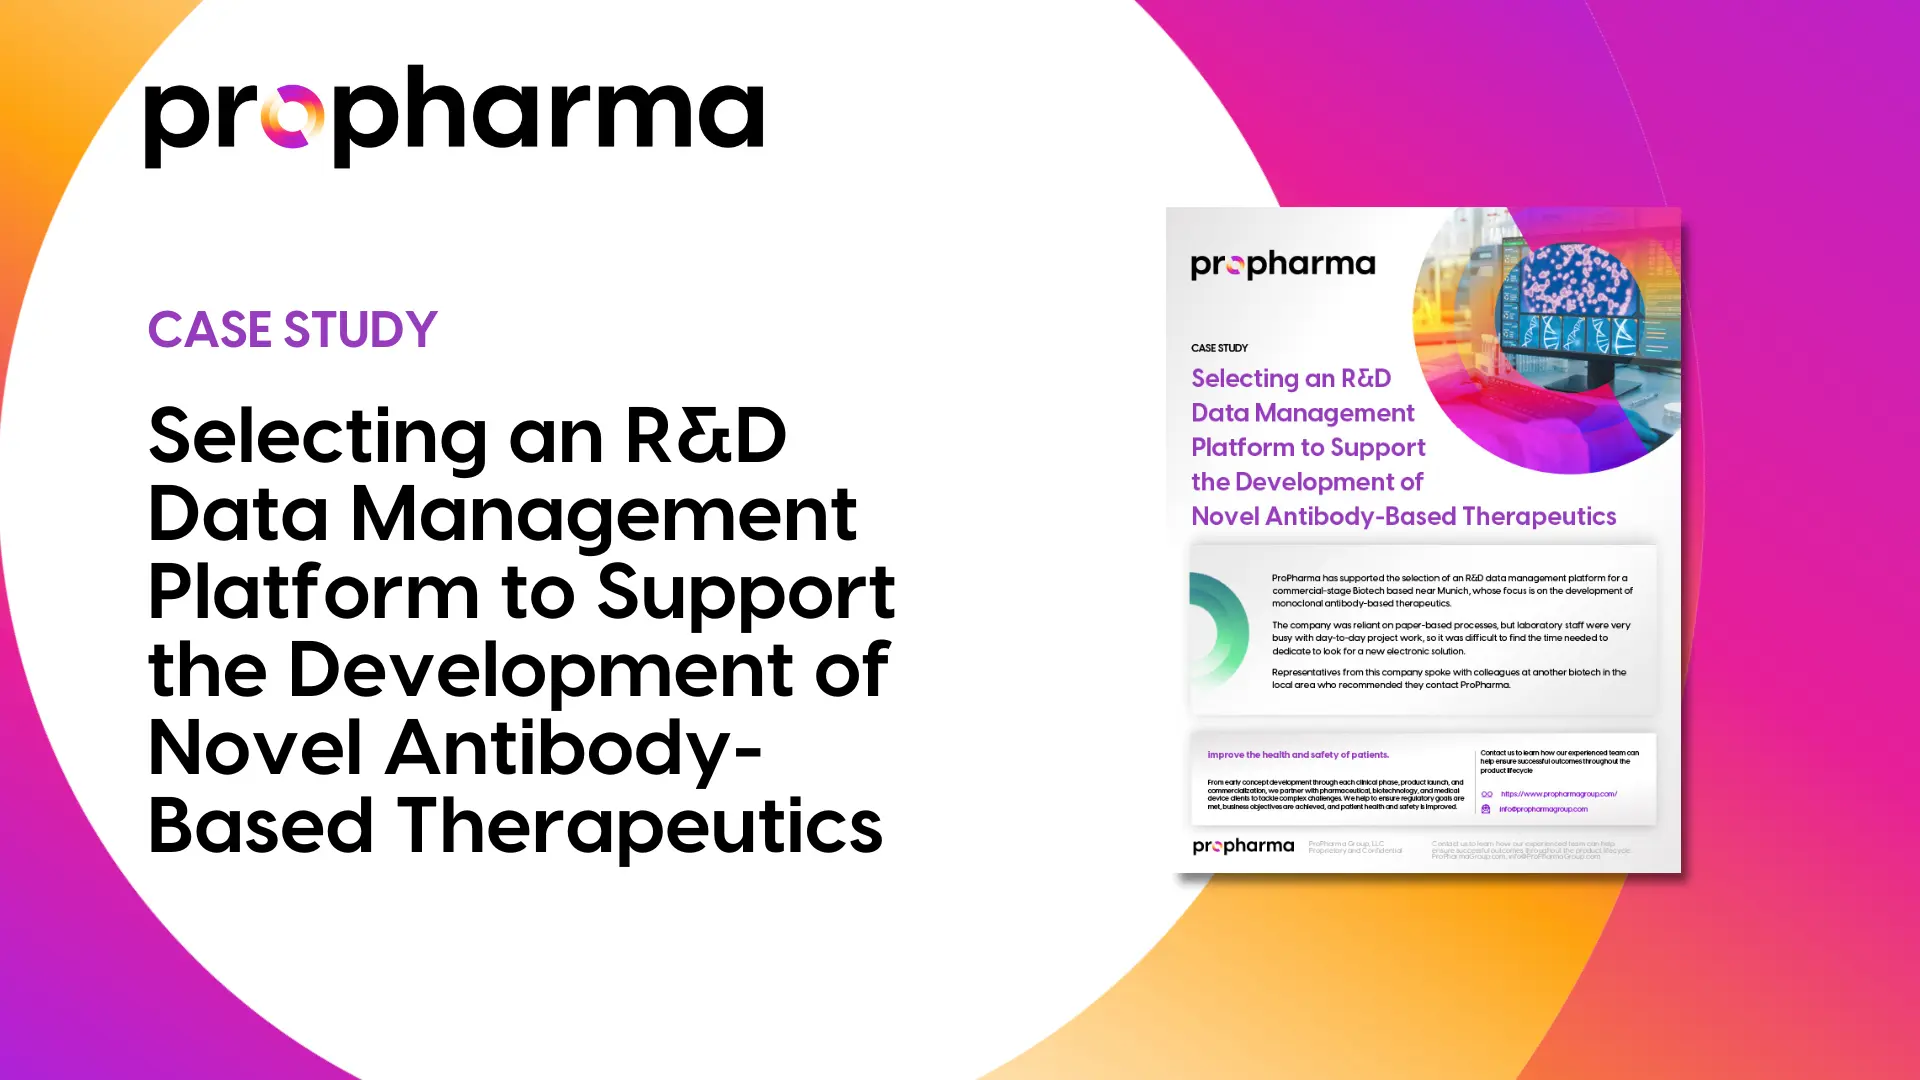 Selecting an R&D Data Management Platform to Support the Development of Novel Antibody-Based Therapeutics Image